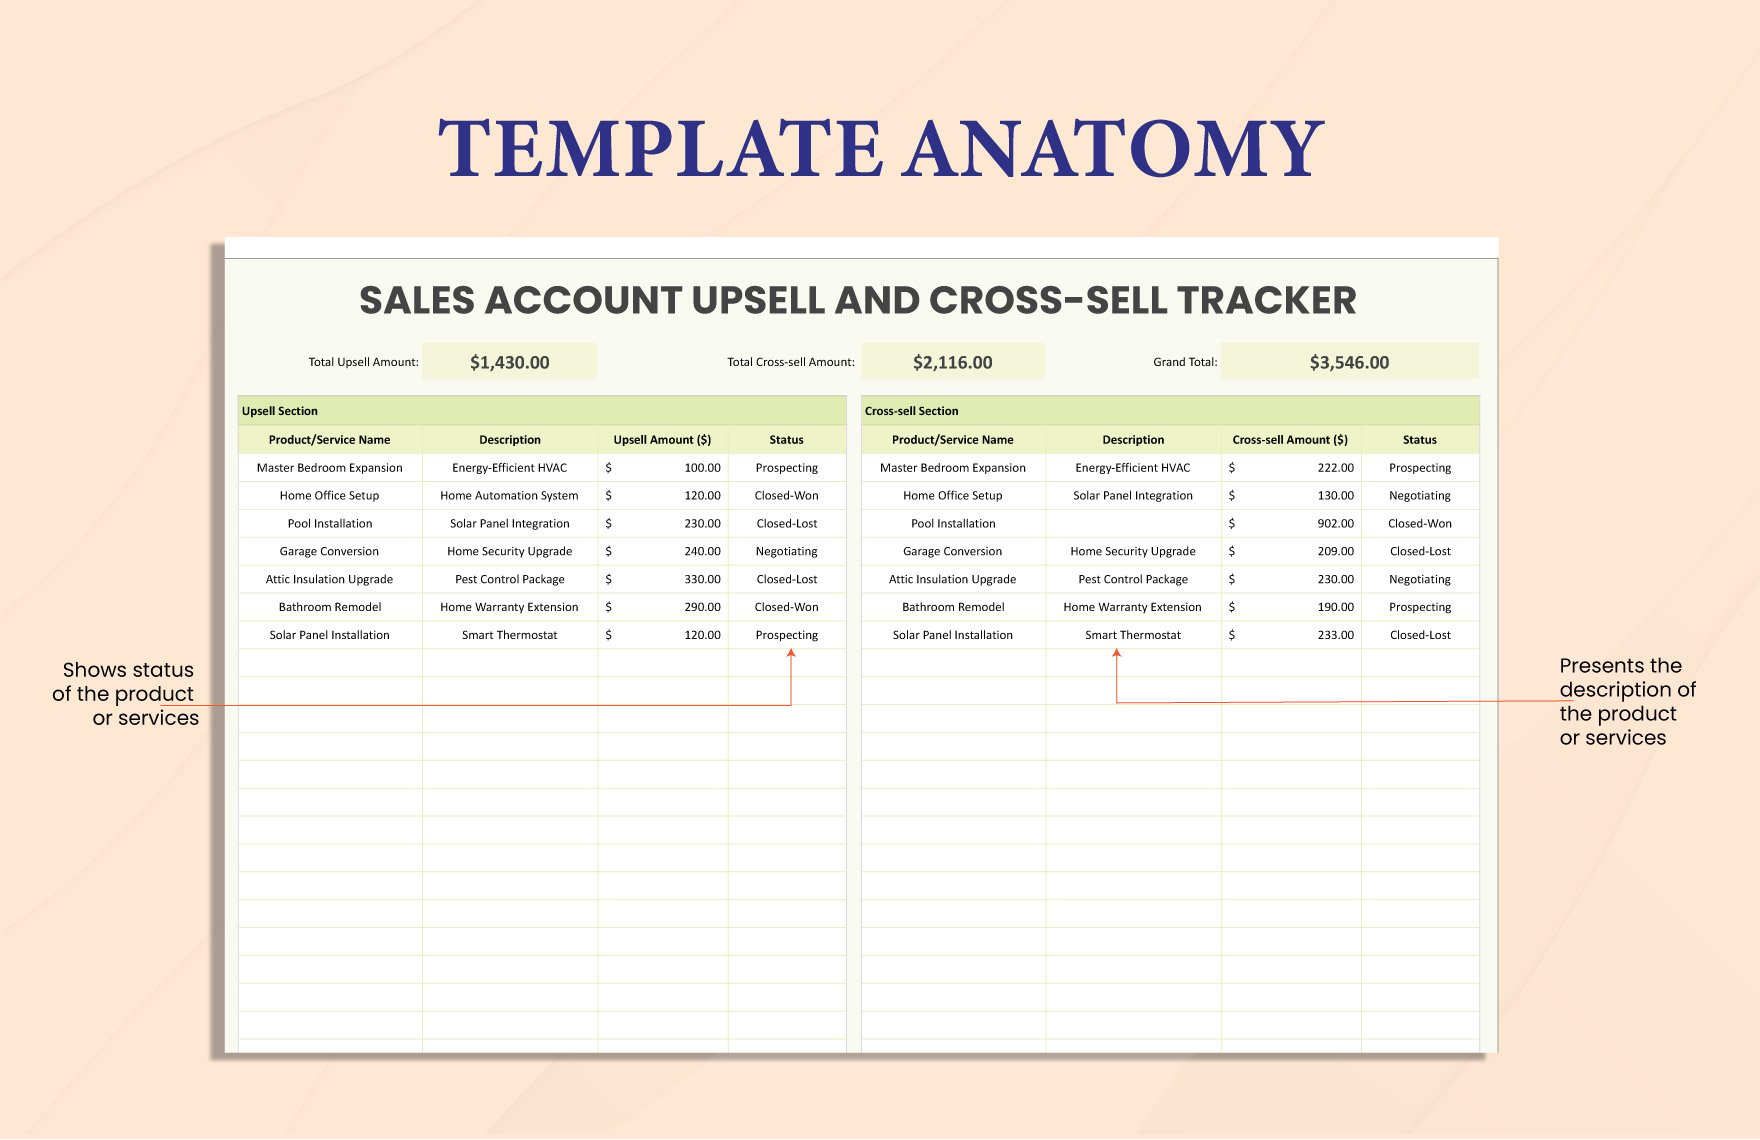 Sales Account Upsell and Cross-sell Tracker Template